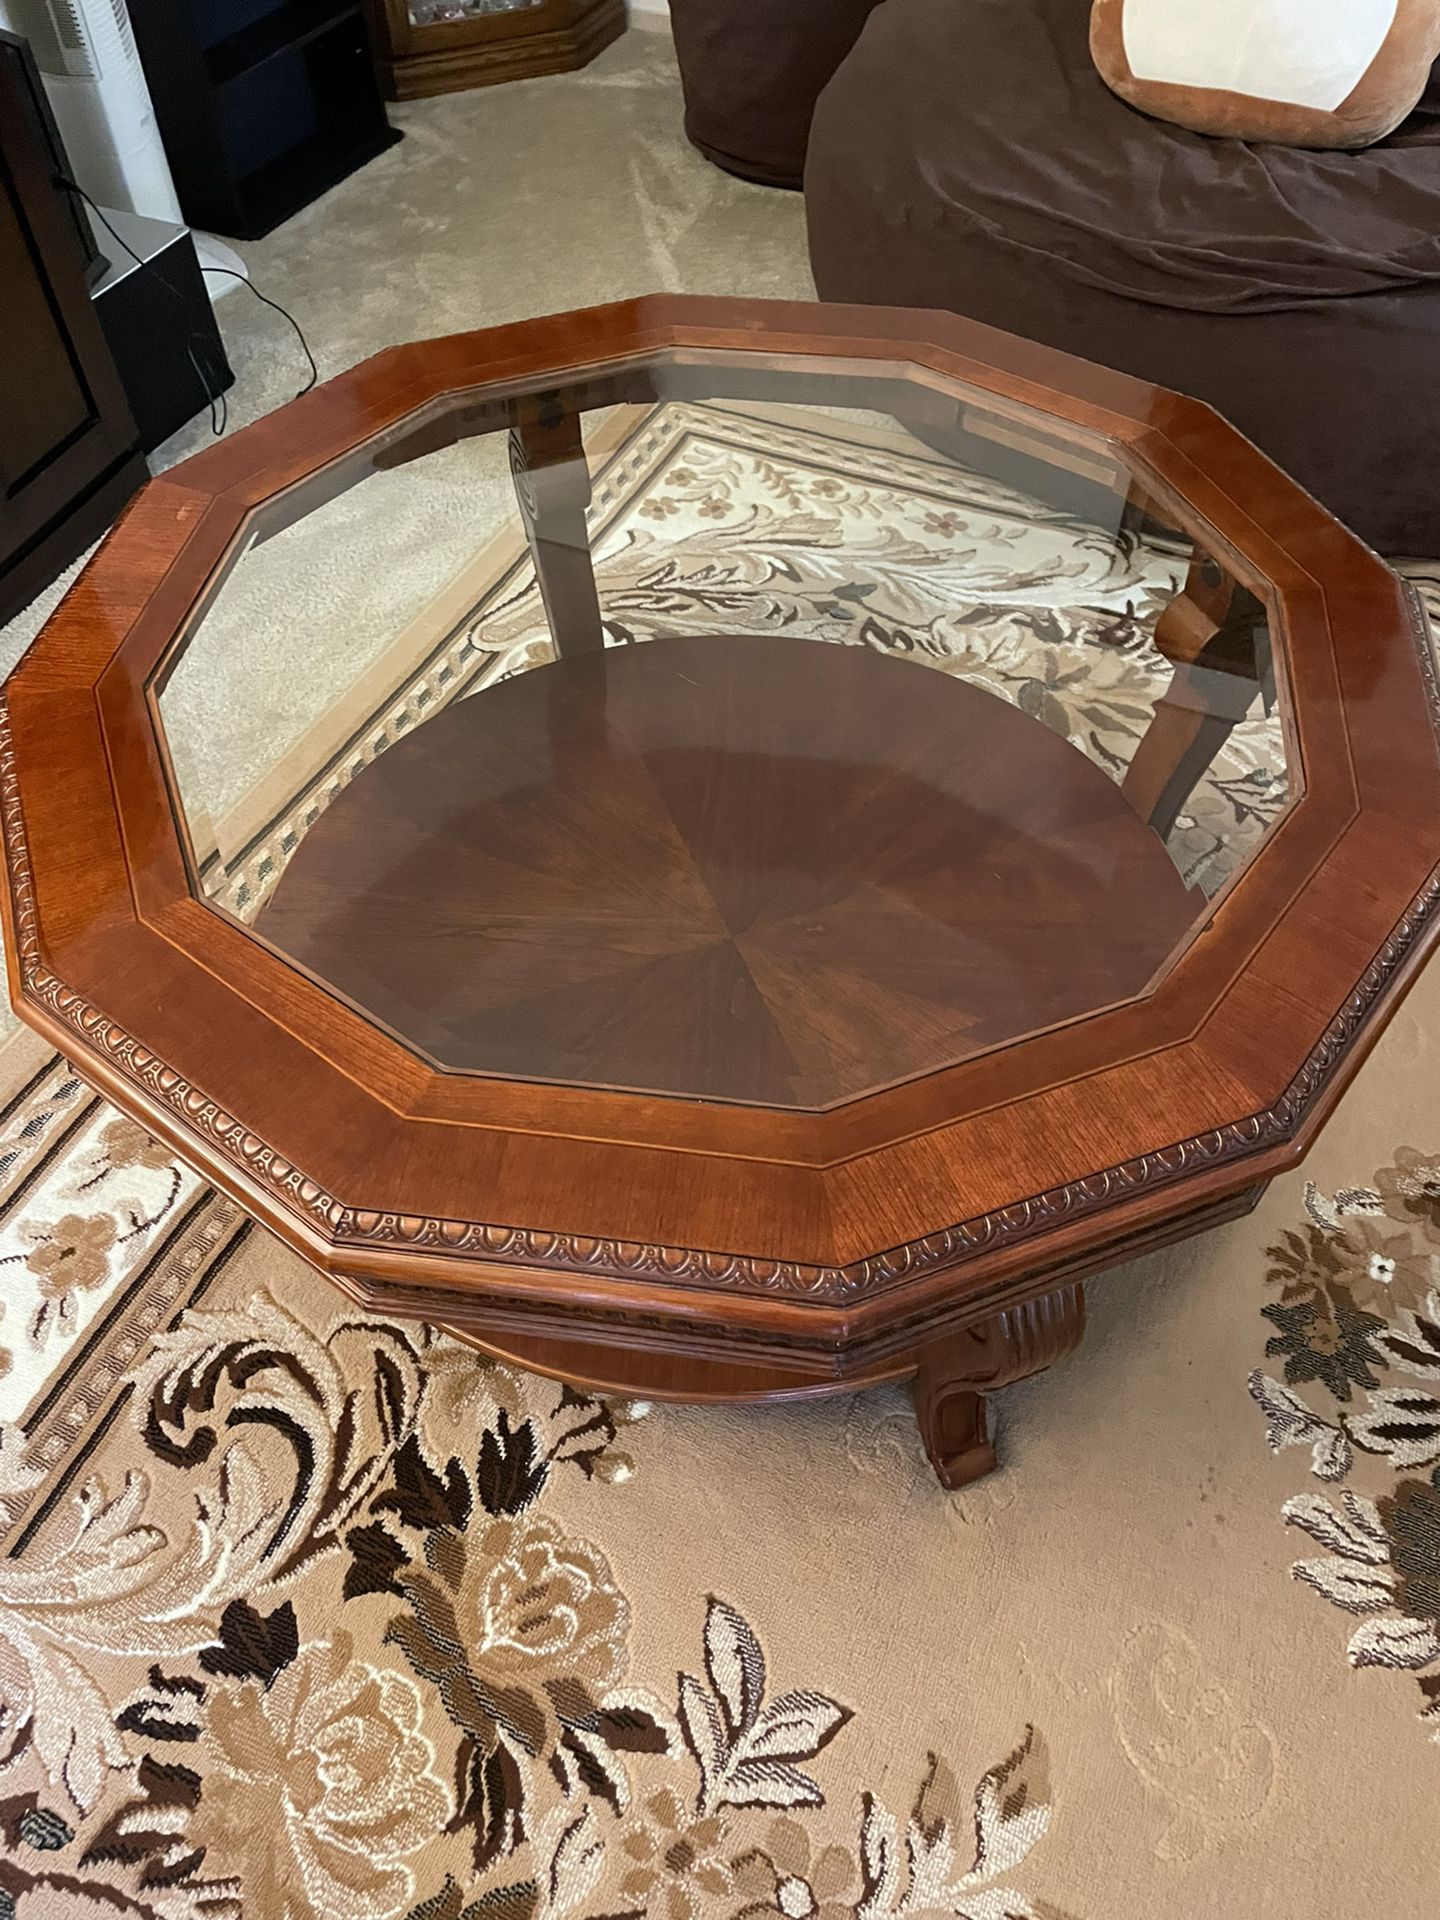 2 Level Table With Glass Center